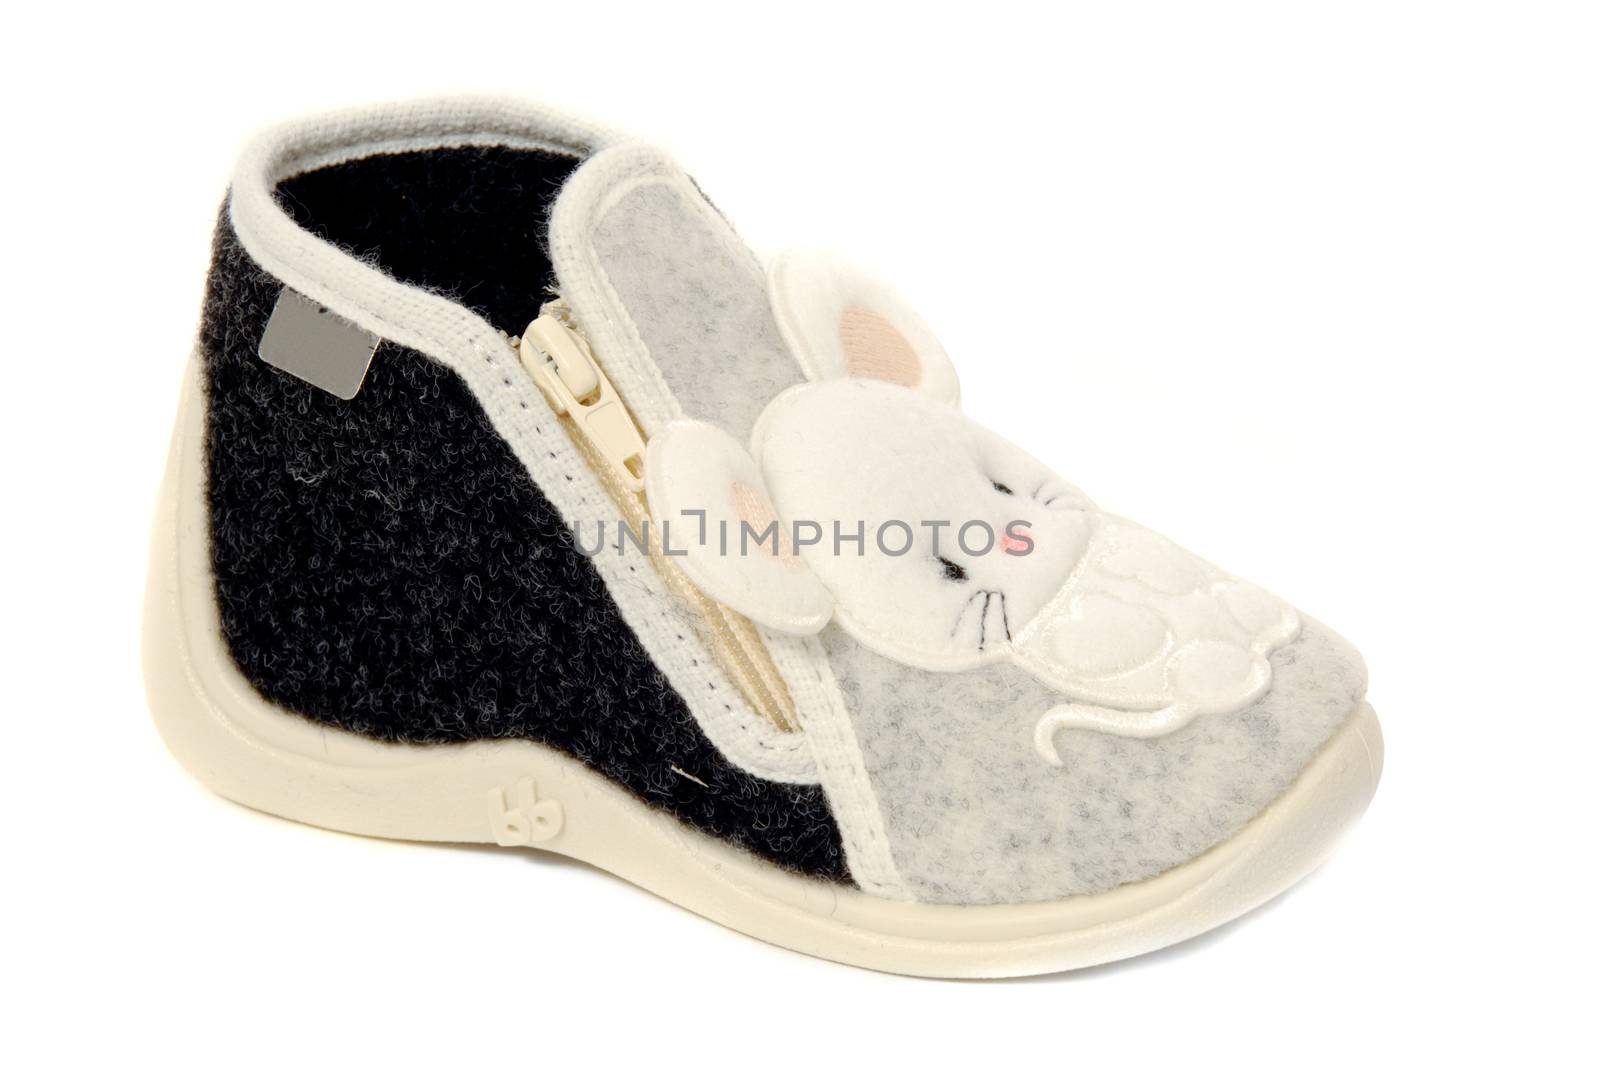 A sweet baby shoe taken on a clean white background.